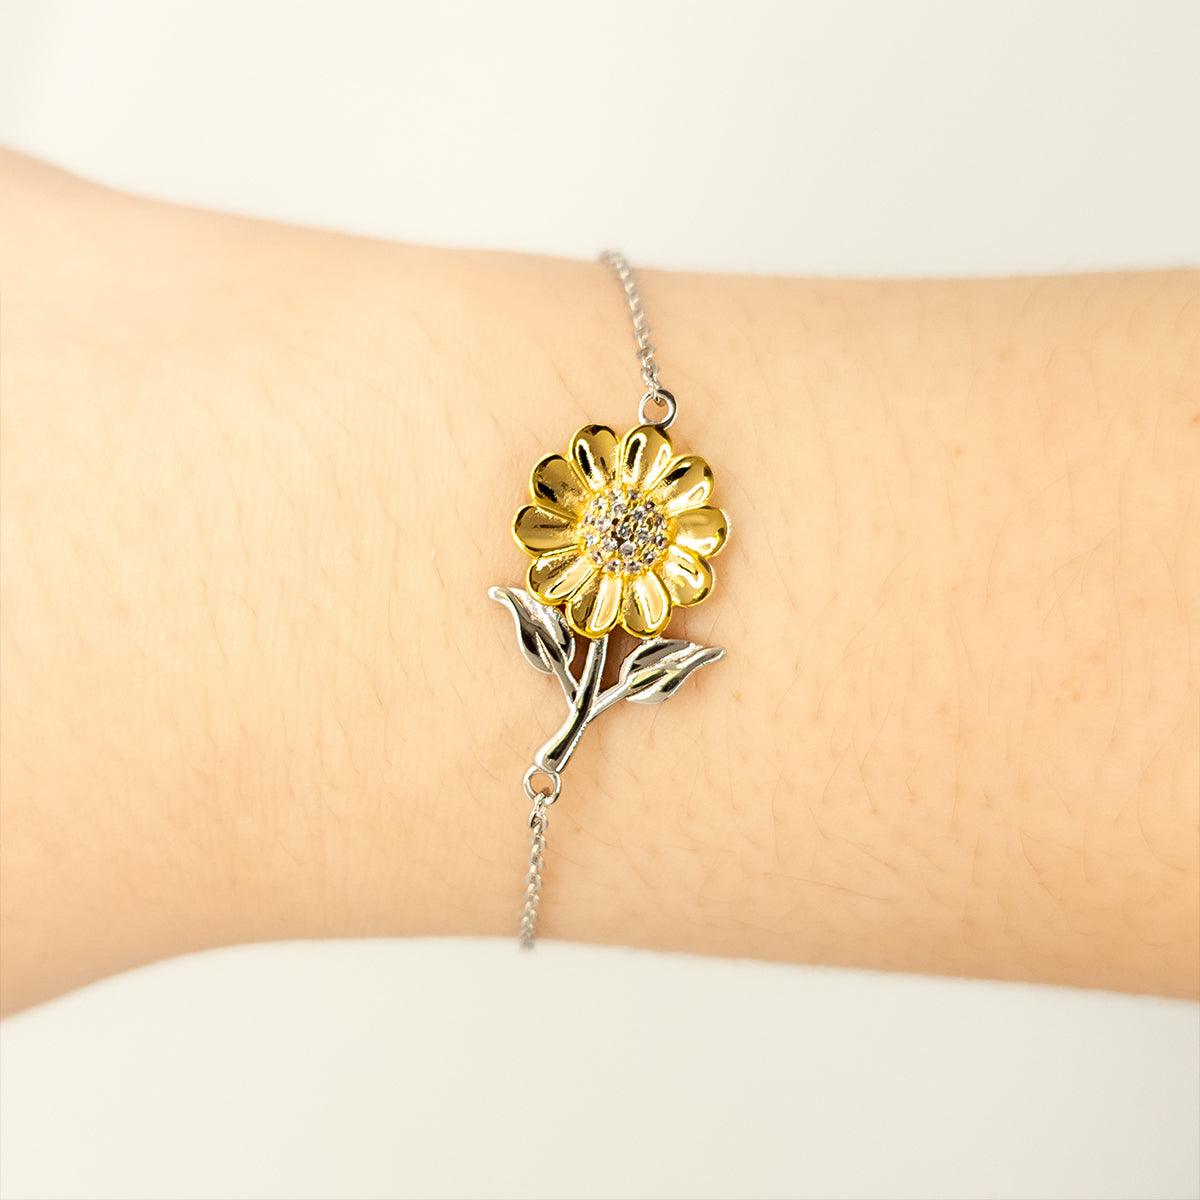 Sarcastic Barber Sunflower Bracelet Gifts, Christmas Holiday Gifts for Barber Birthday Message Card, Barber: Because greatness is woven into the fabric of every day, Coworkers, Friends - Mallard Moon Gift Shop